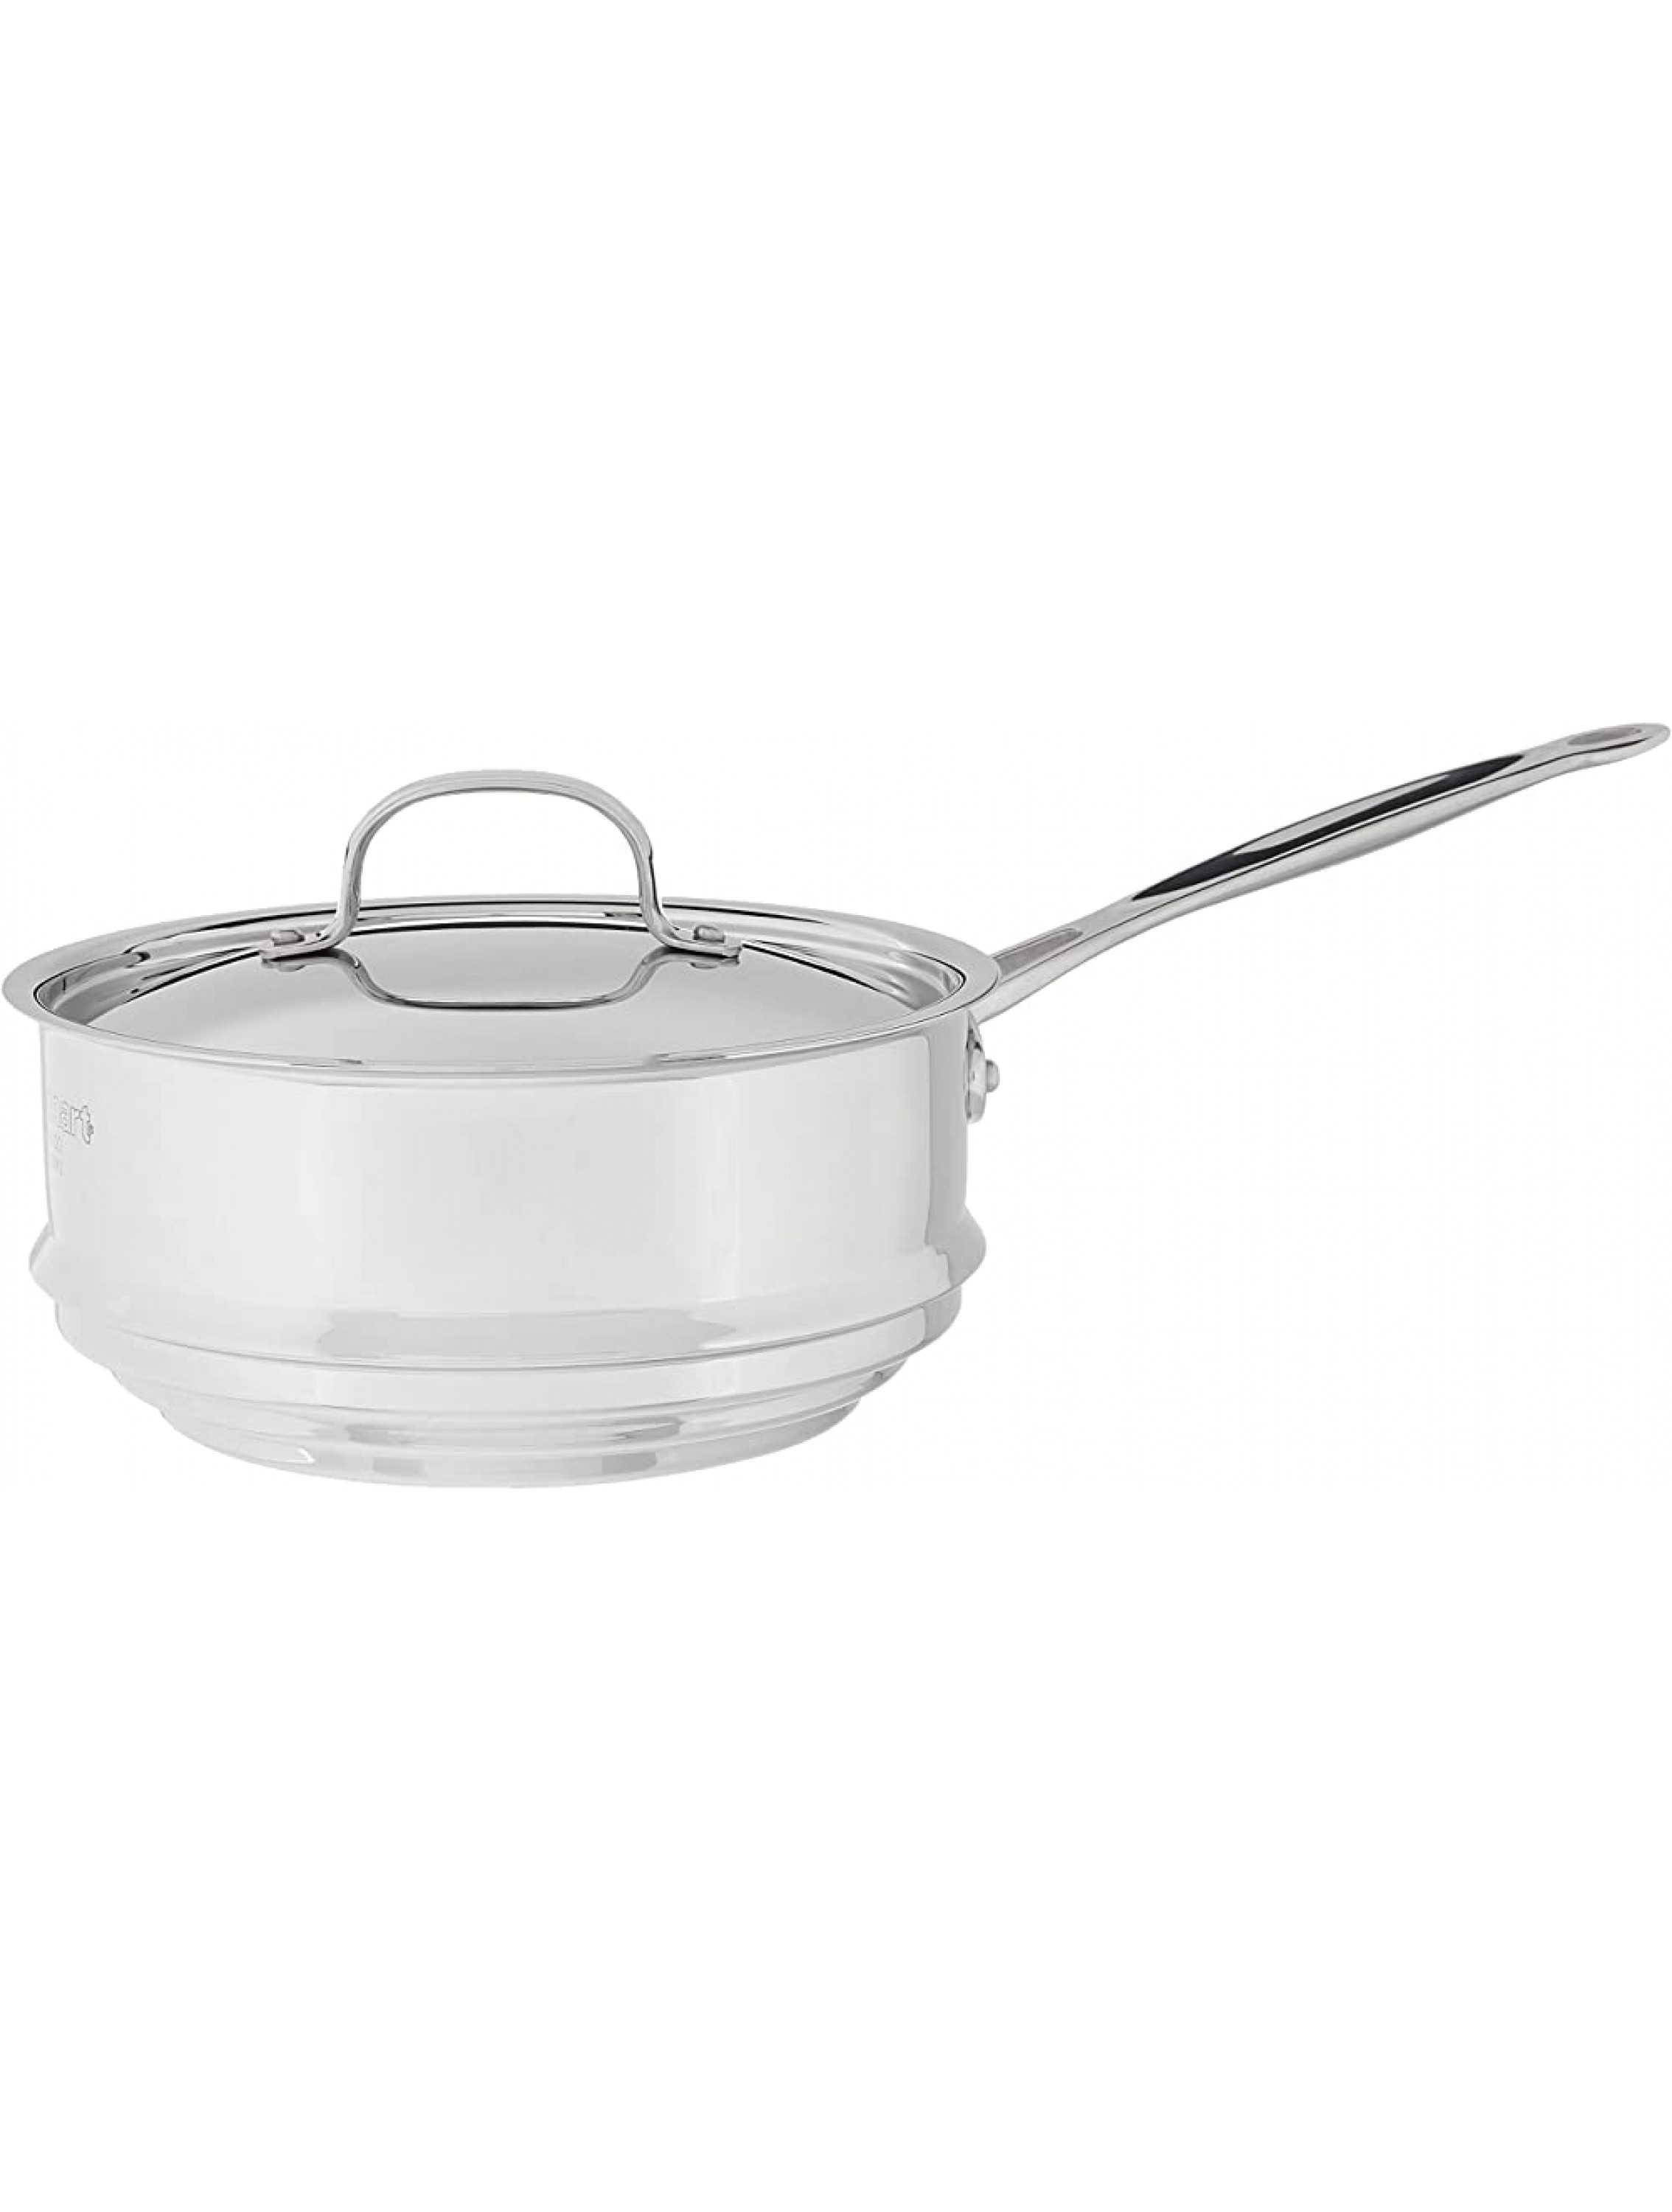 Cuisinart 7116-20 Chef's Classic 20-Centimeter Universal Steamer with Cover - BF8IVB8PC